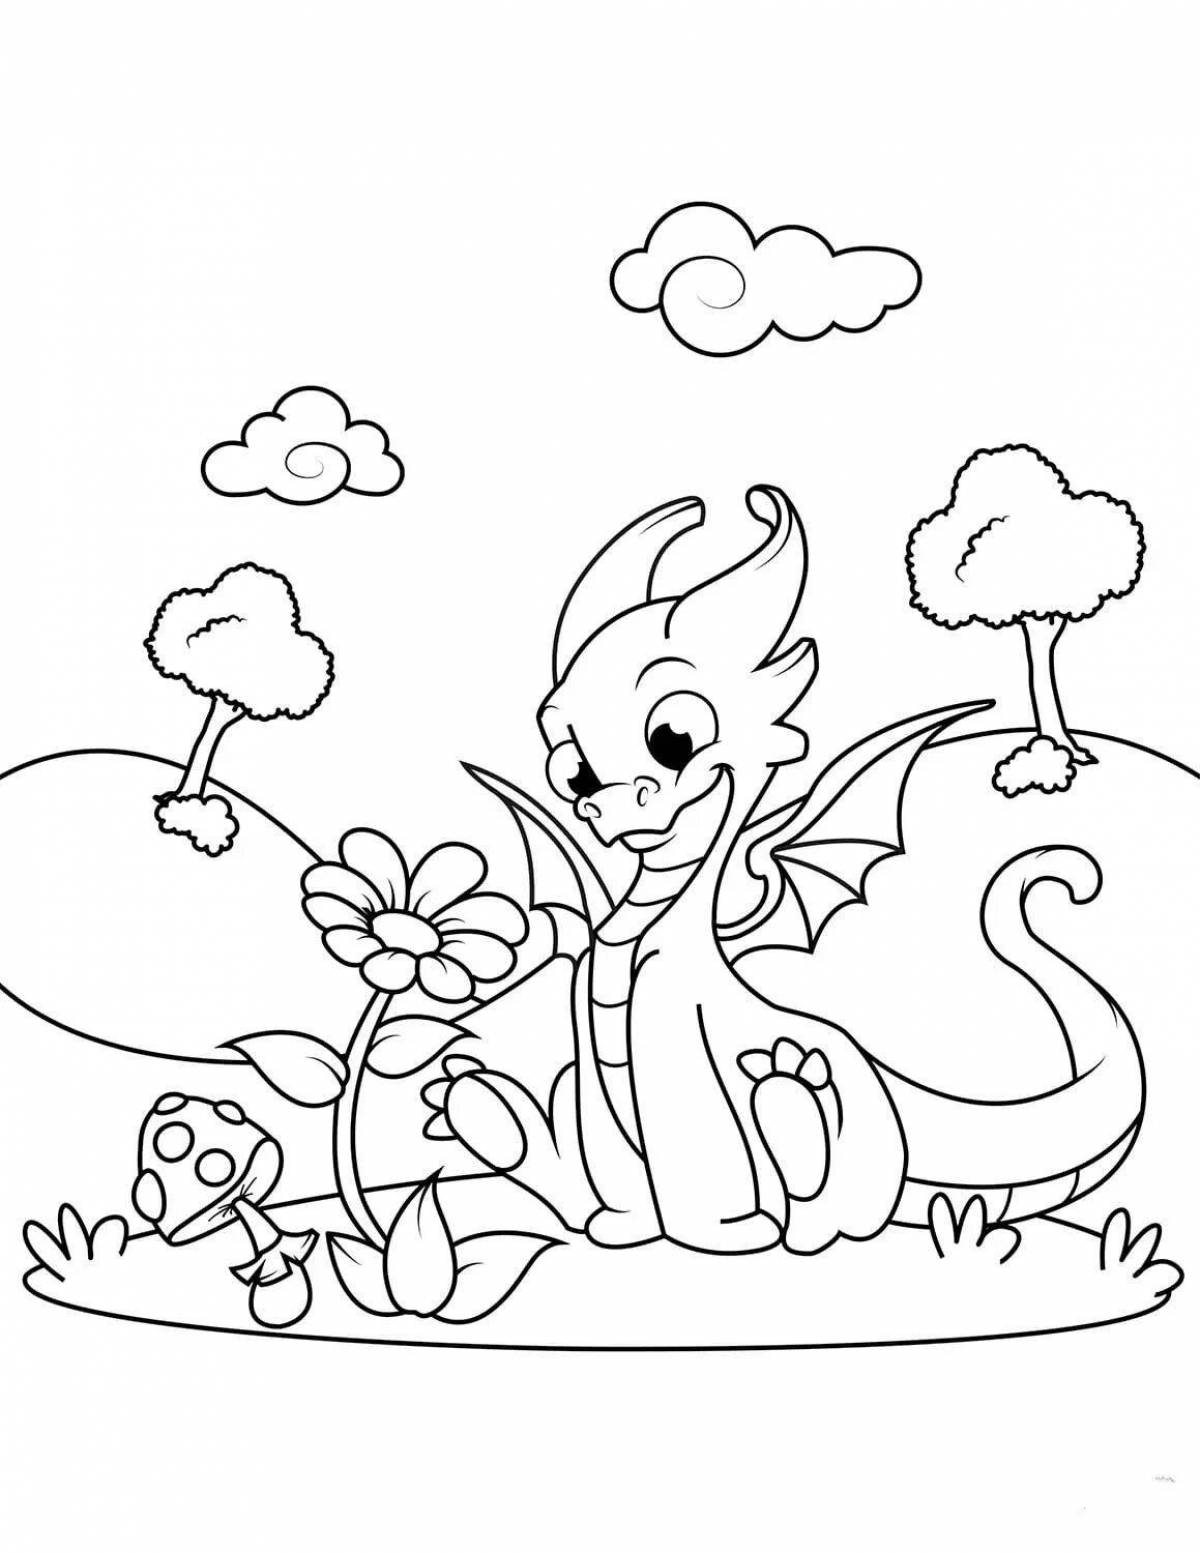 Fancy dragon coloring pages for kids